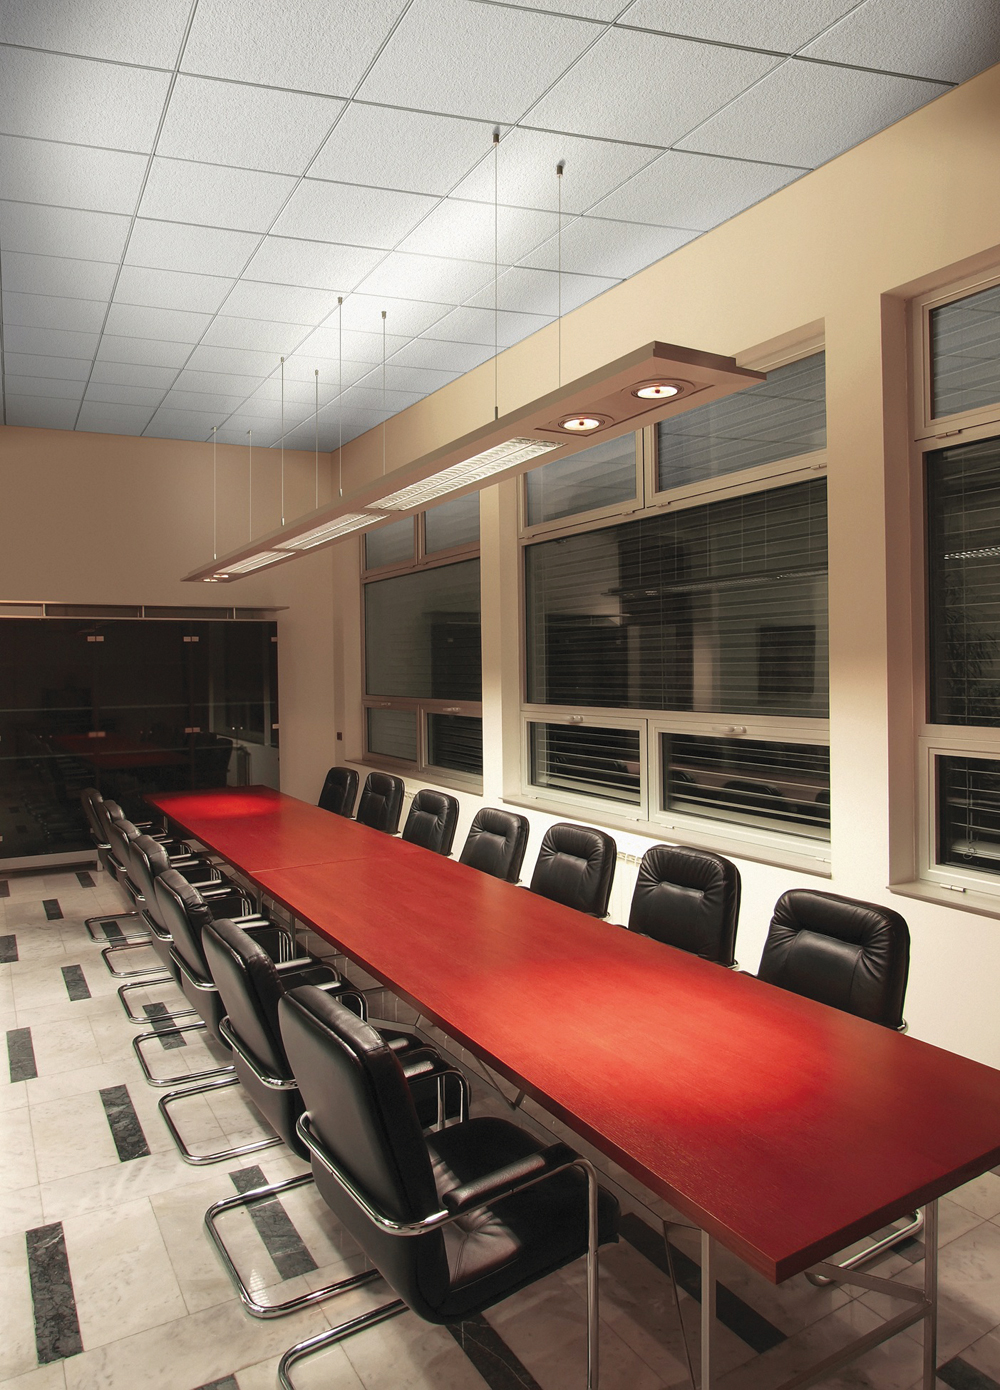 Bria ClimaPlus acoustical ceiling panels from USG Corp.